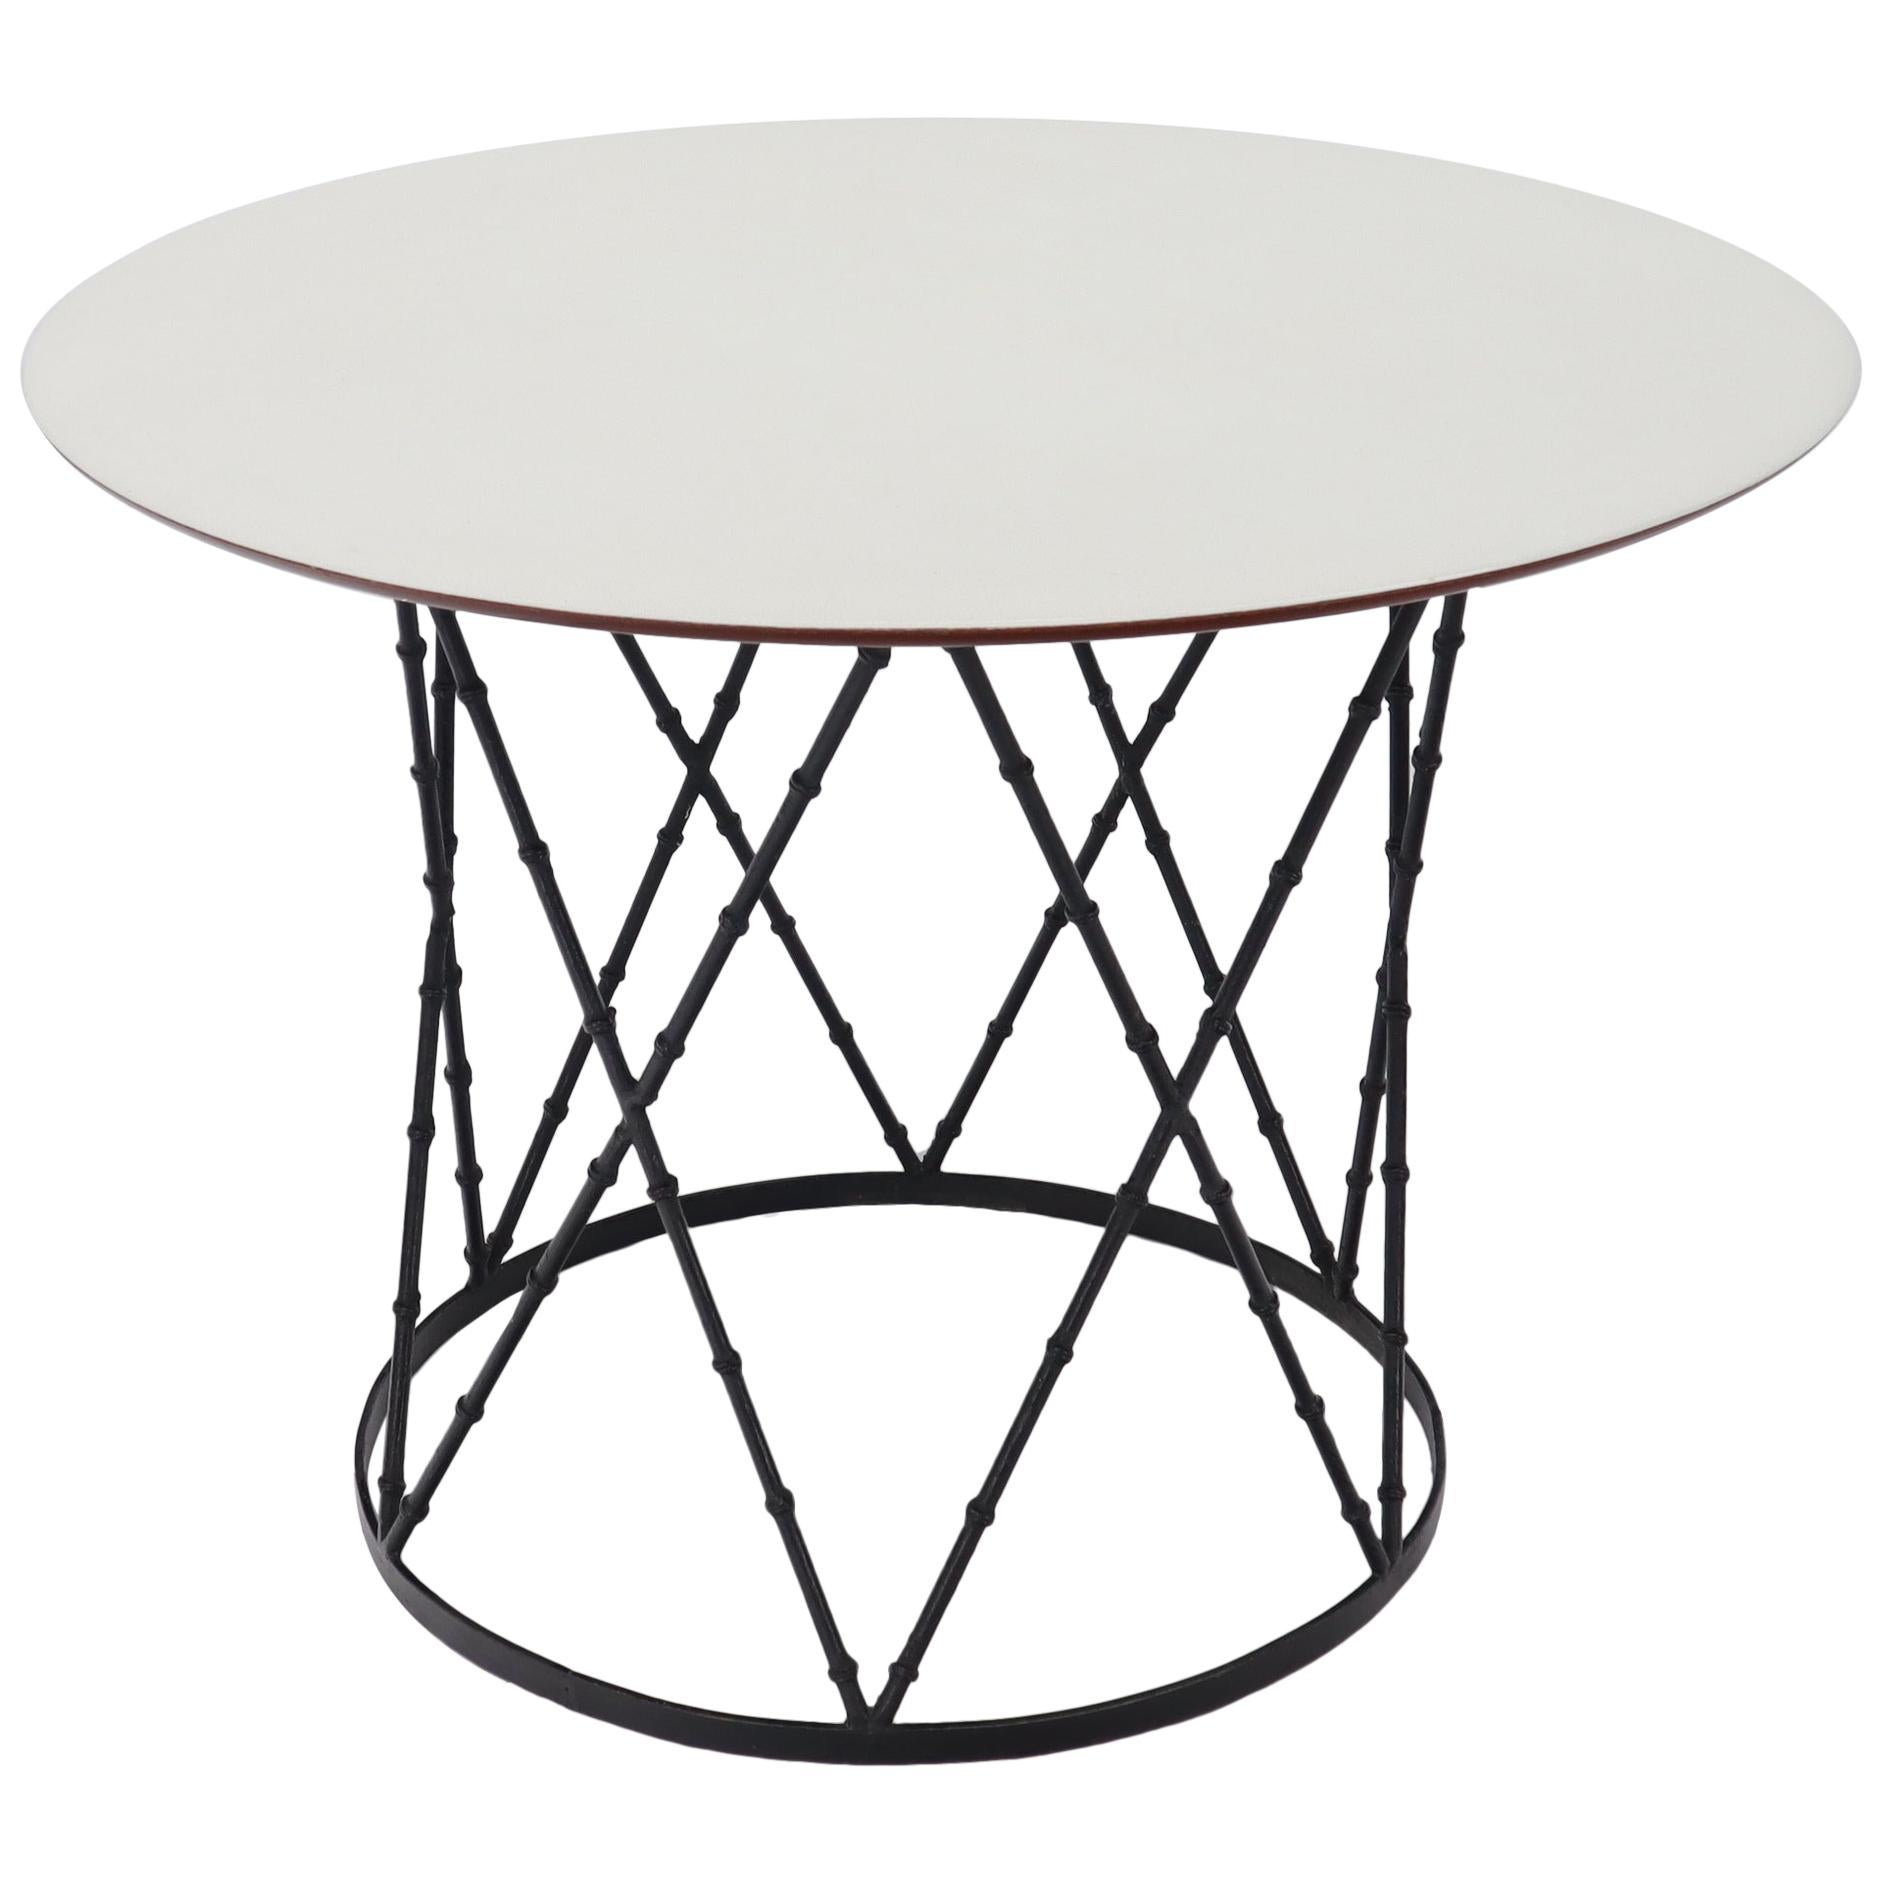 Enameled Top Faux Bamboo Base Mid-Century Modern Dining Dinette Table